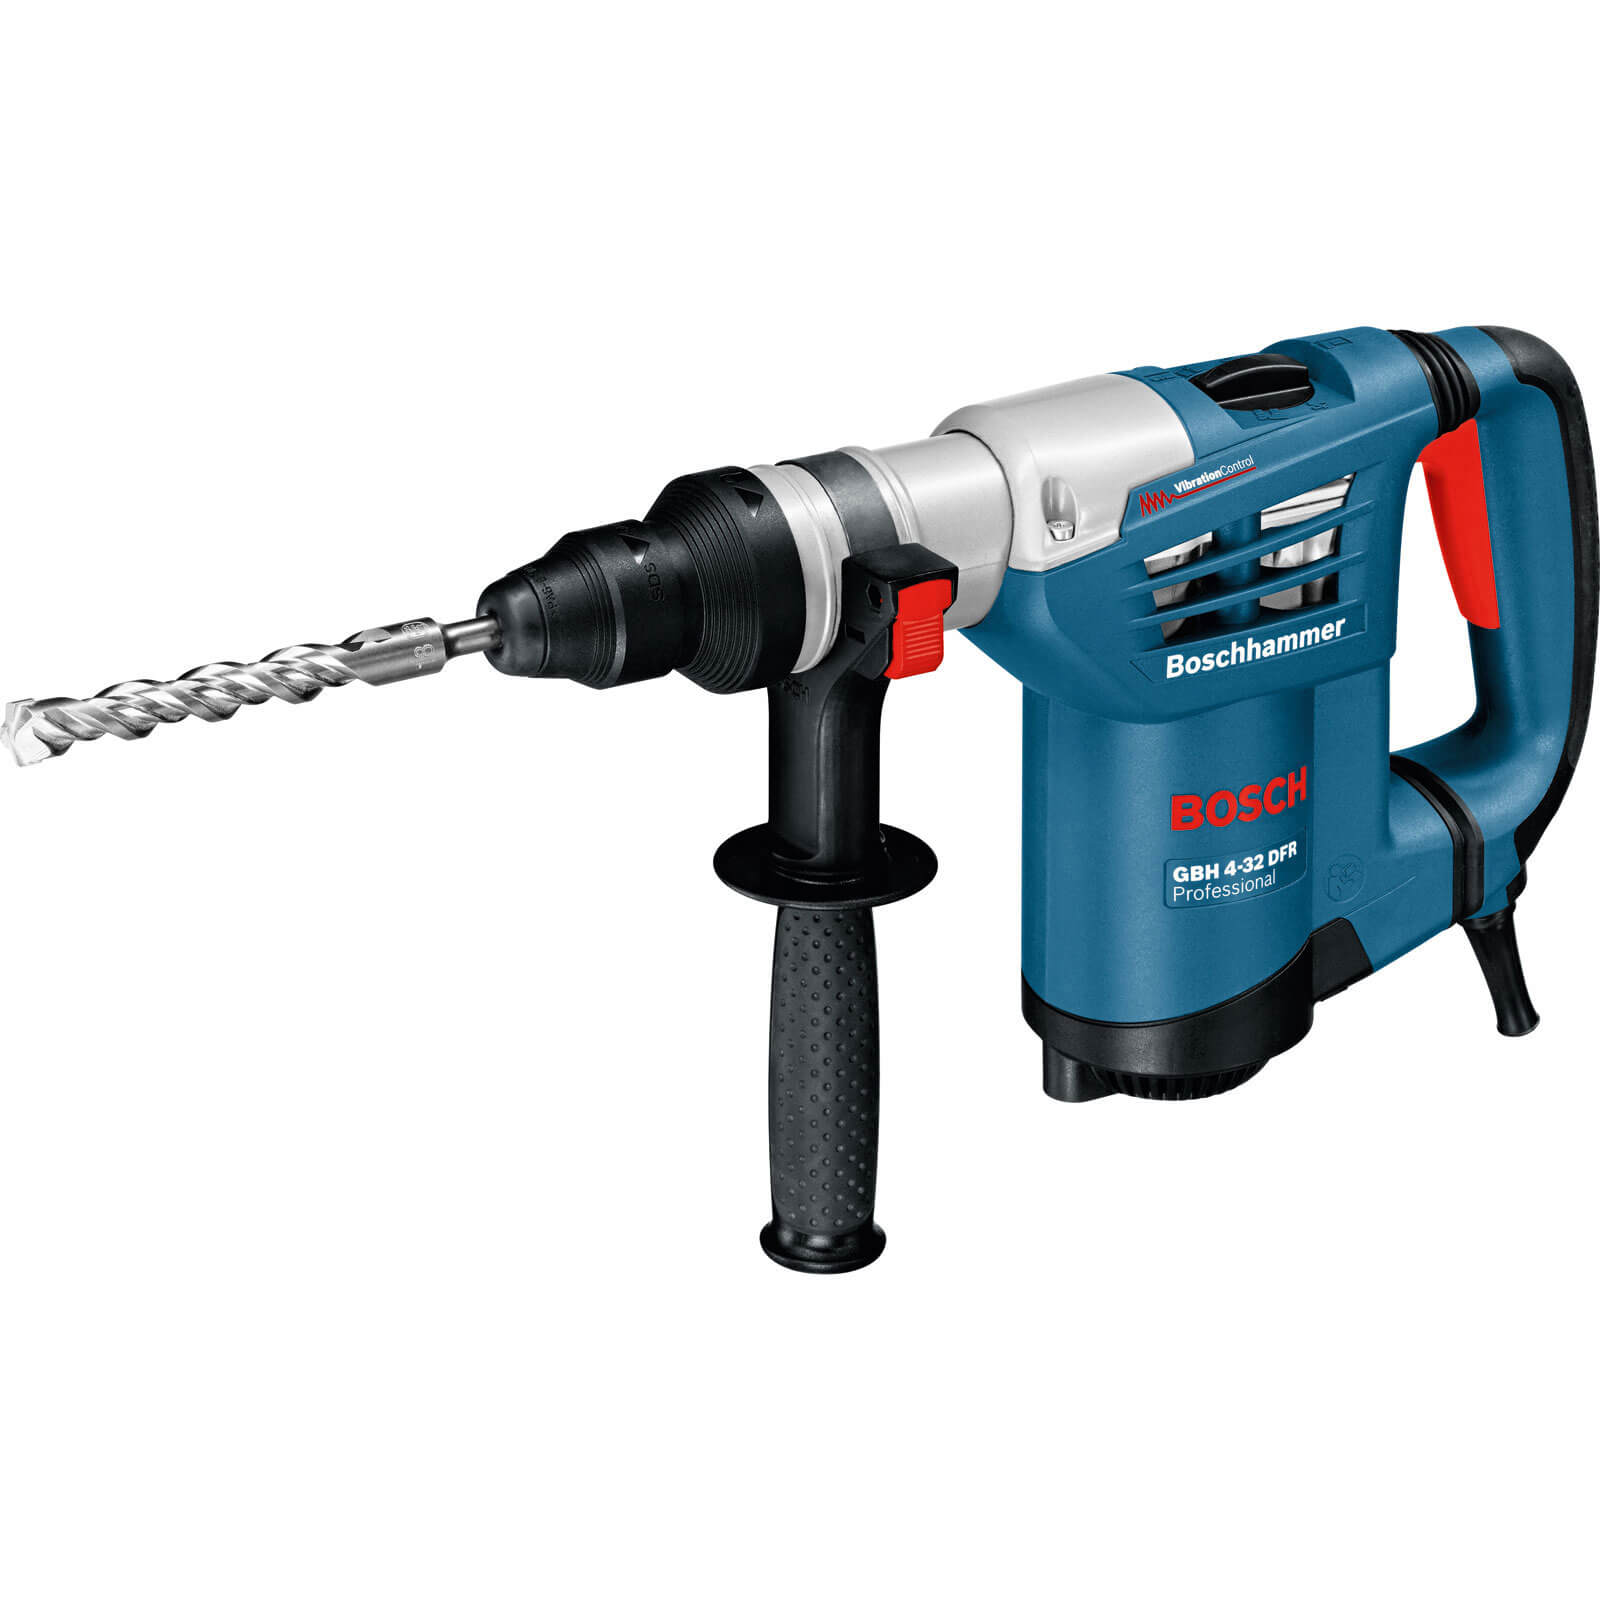 Image of Bosch GBH 4 32 DFR SDS Plus Rotary Hammer Drill 110v